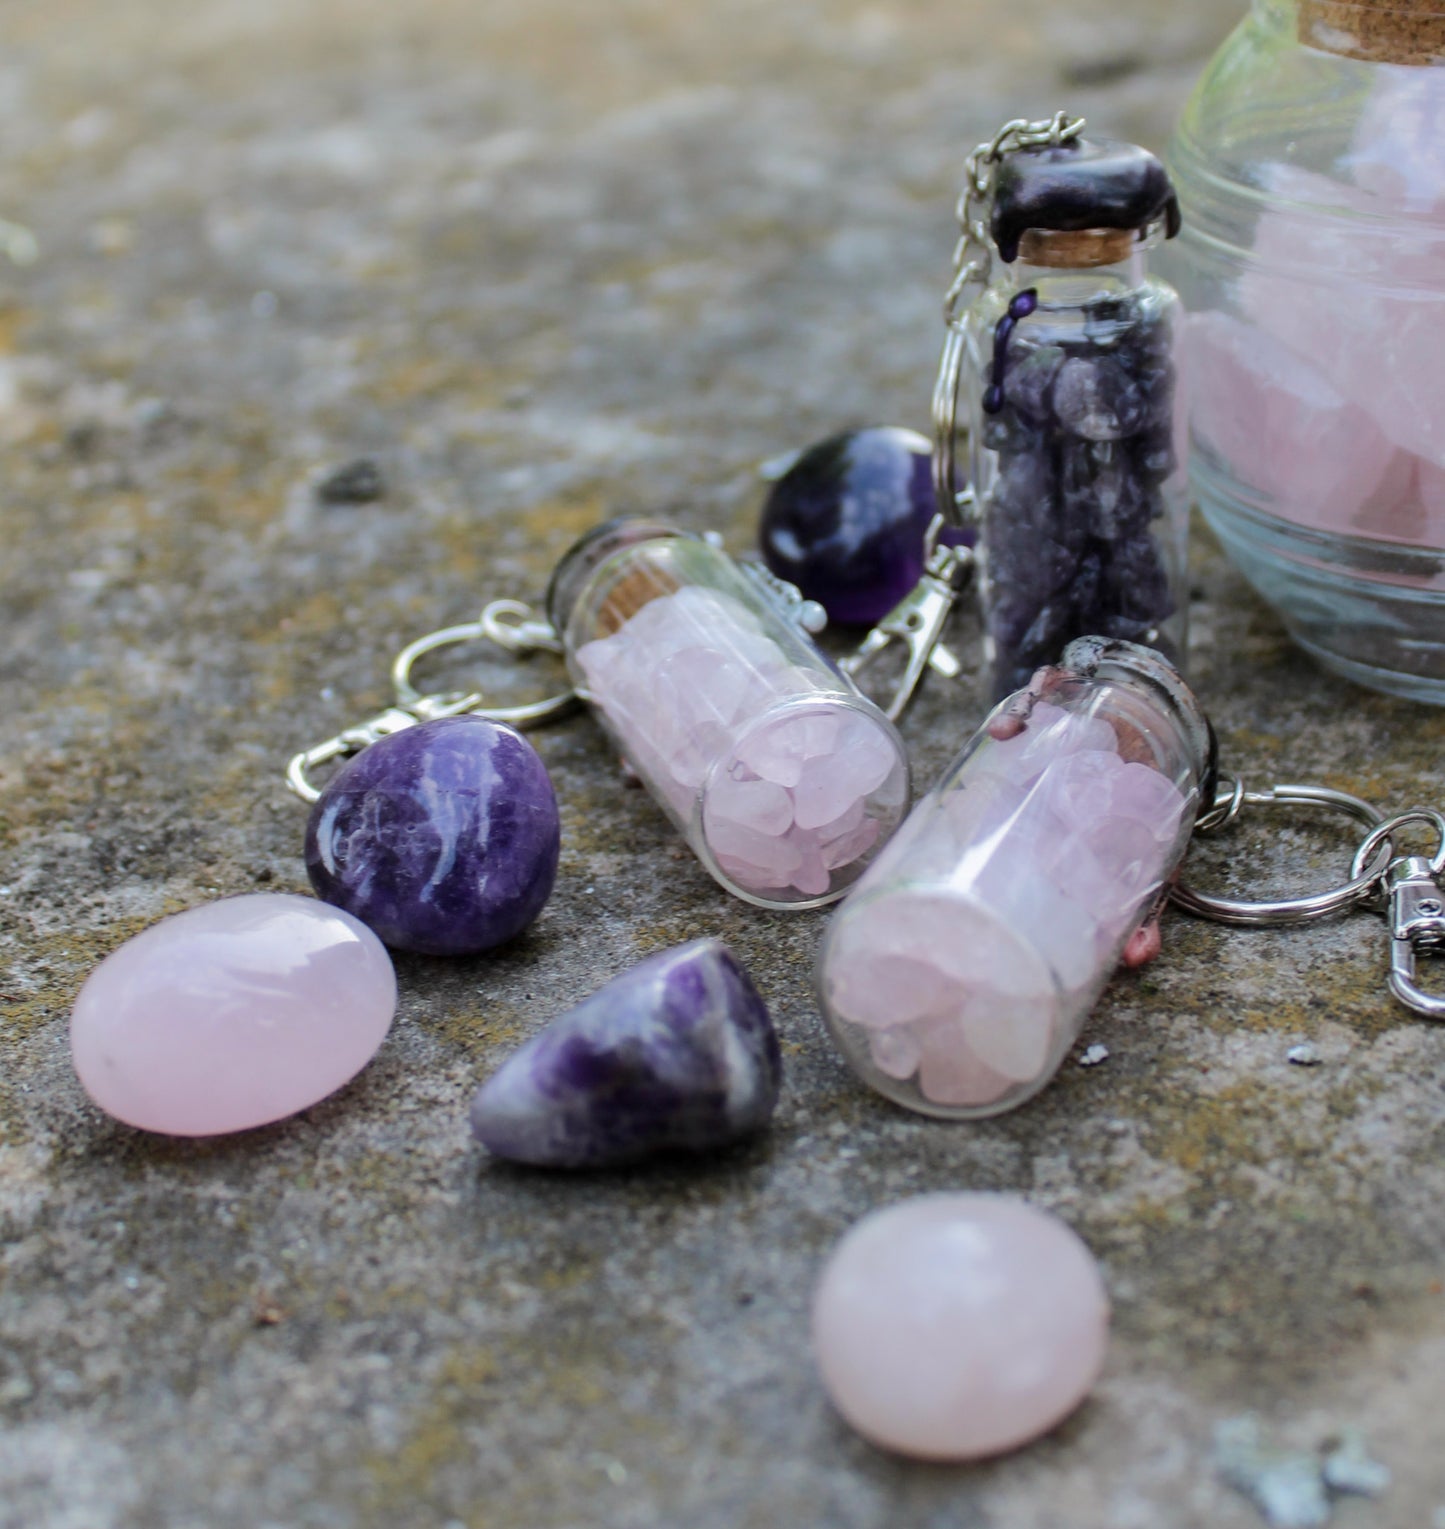 rose quartz, and amethyst crystals inside clear glass jar with wax seals and keychain attachments in front of an old tombstone by gravely goods scattered next to rose quartz, and amethyst tumbled stones